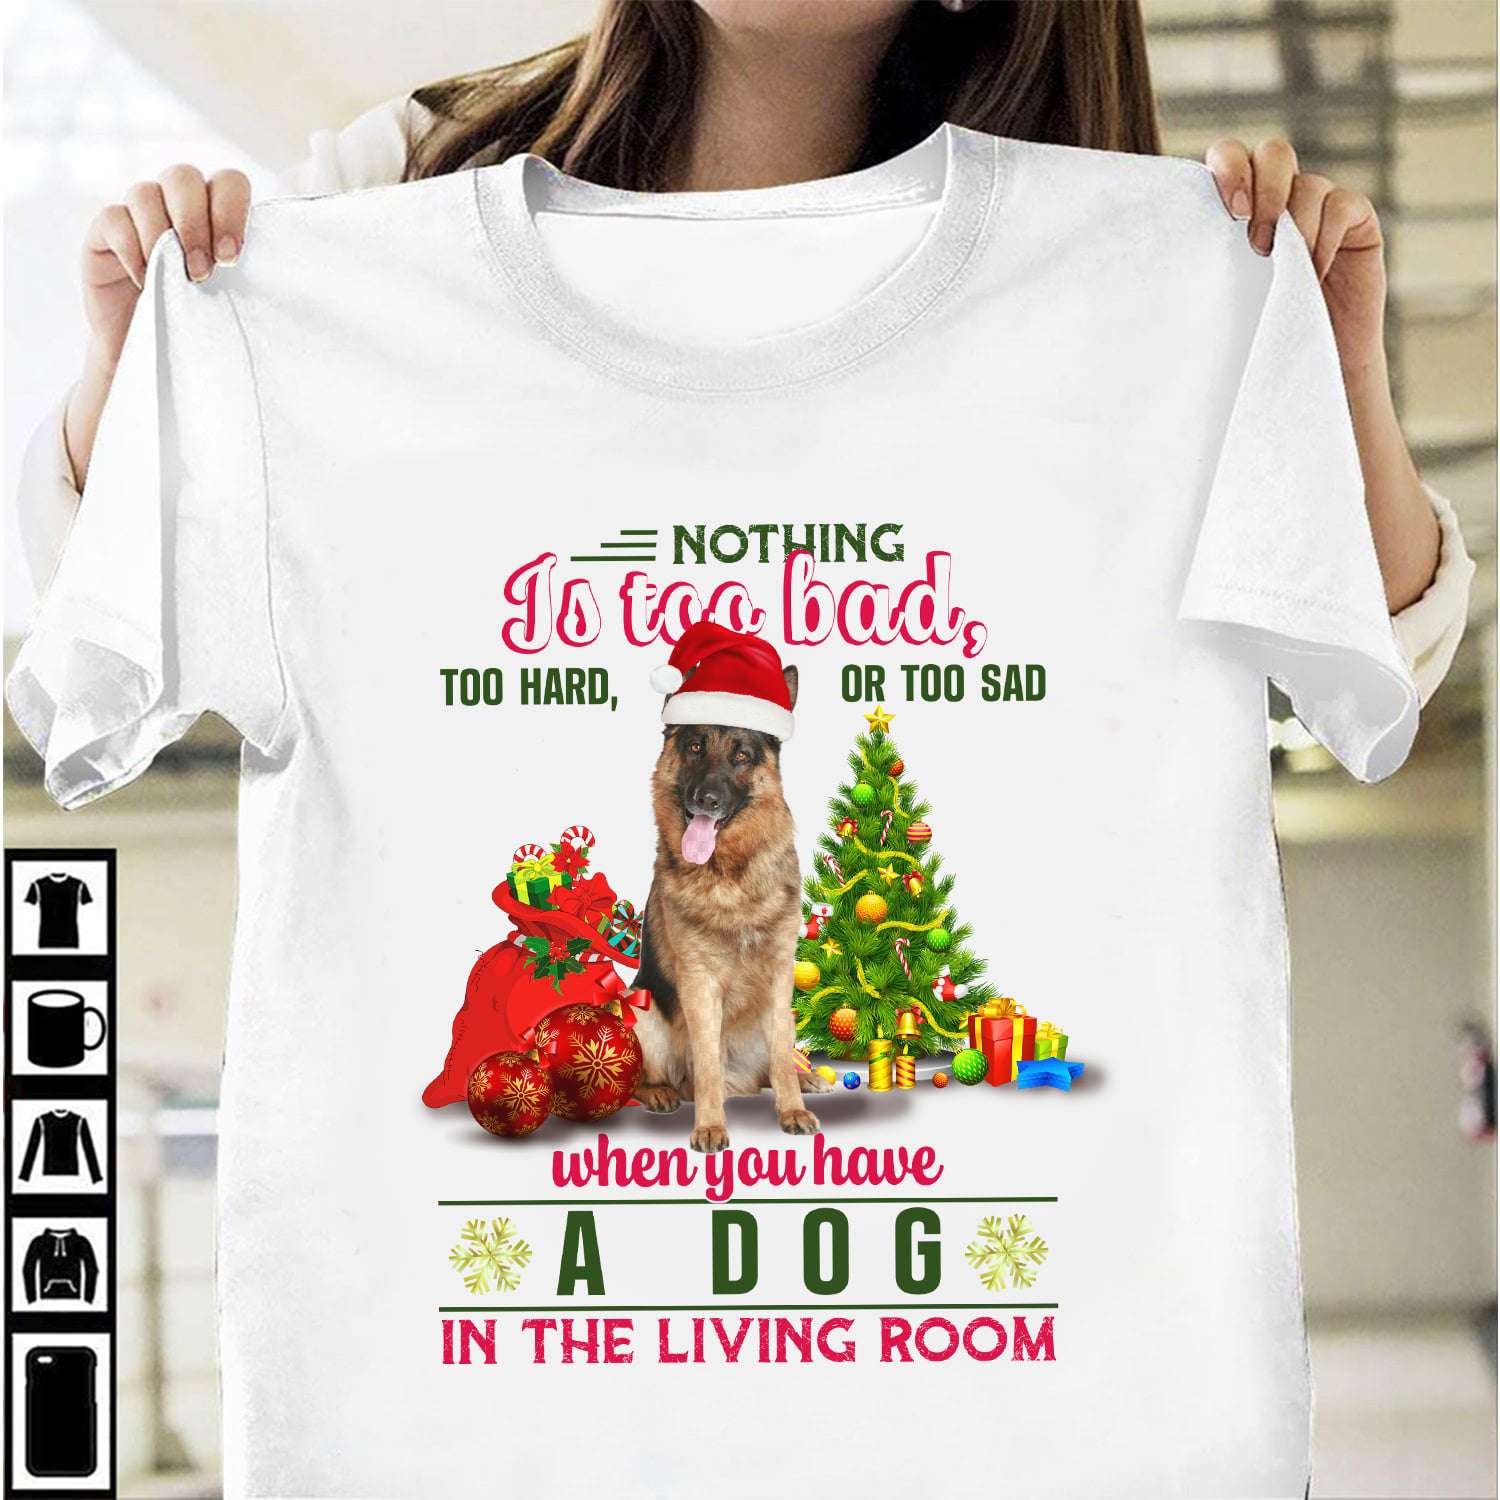 Christmas German Shepherd Costume, Christmas Gift - Nothing is too bad too hard or too sad when you have a dog in the living room